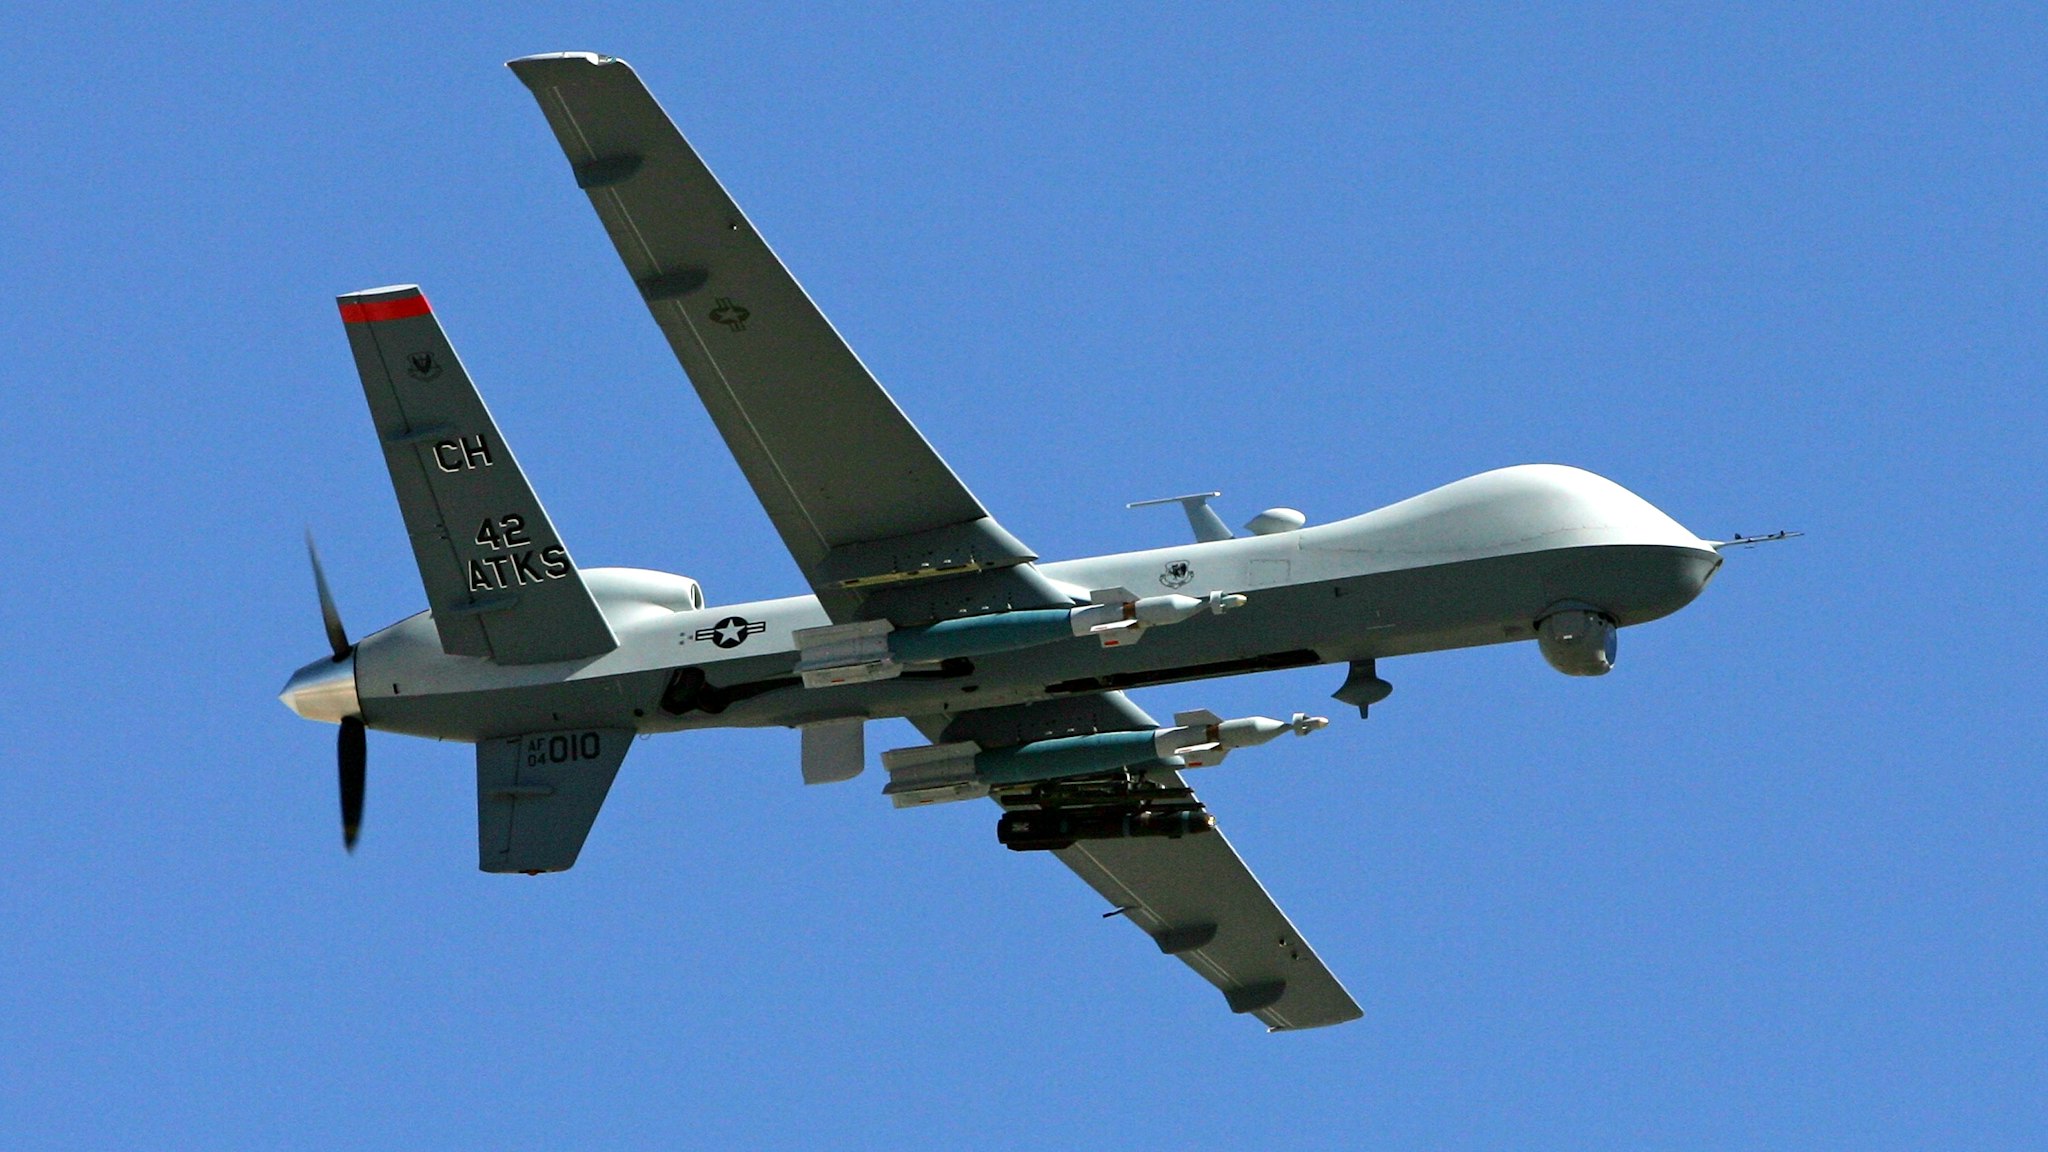 CREECH AIR FORCE BASE, NV - AUGUST 08: An MQ-9 Reaper flies by August 8, 2007 at Creech Air Force Base in Indian Springs, Nevada. The Reaper is the Air Force's first "hunter-killer" unmanned aerial vehicle (UAV), designed to engage time-sensitive targets on the battlefield as well as provide intelligence and surveillance. The jet-fighter sized Reapers are 36 feet long with 66-foot wingspans and can fly for up to 14 hours fully loaded with laser-guided bombs and air-to-ground missiles. They can fly twice as fast and high as the smaller MQ-1 Predators, reaching speeds of 300 mph at an altitude of up to 50,000 feet. The aircraft are flown by a pilot and a sensor operator from ground control stations. The Reapers are expected to be used in combat operations by the U.S. military in Afghanistan and Iraq within the next year.